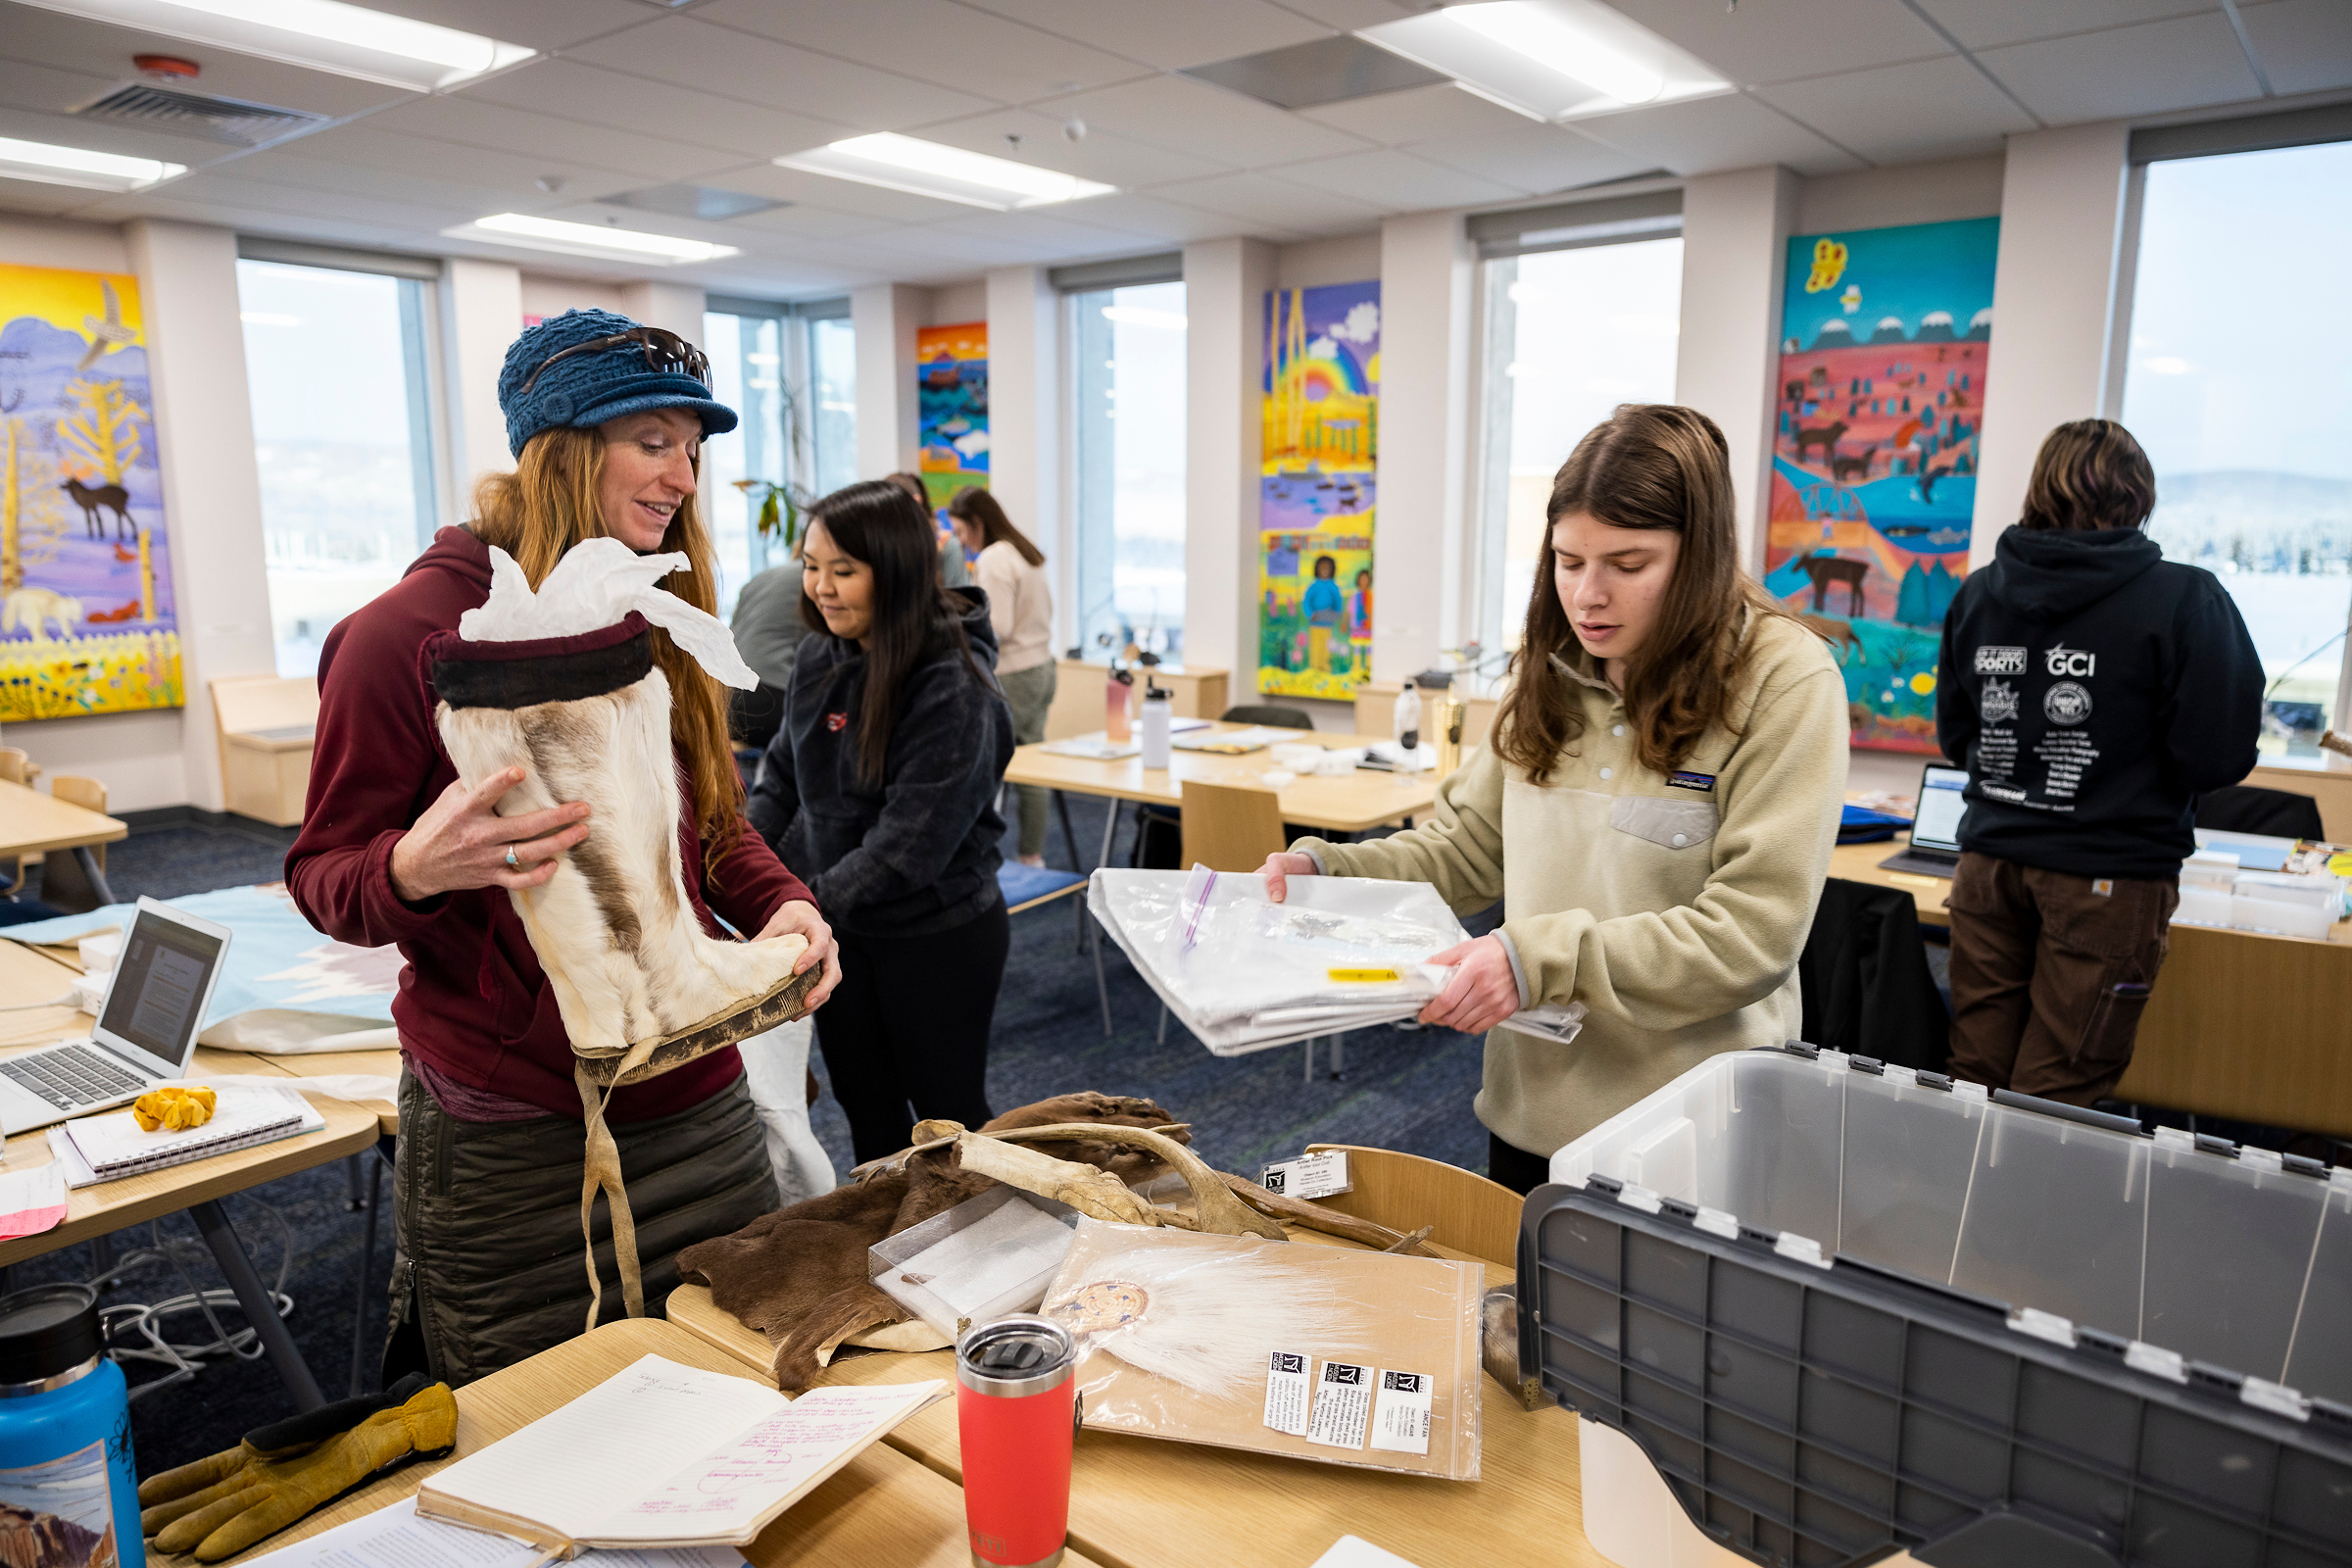 Five people standing in a classroom space with work tables and colorful posters on the walls. Two of them stand working together at a table: One holds a caribou hide mukluk and the other is lifting papers from a storage bin.